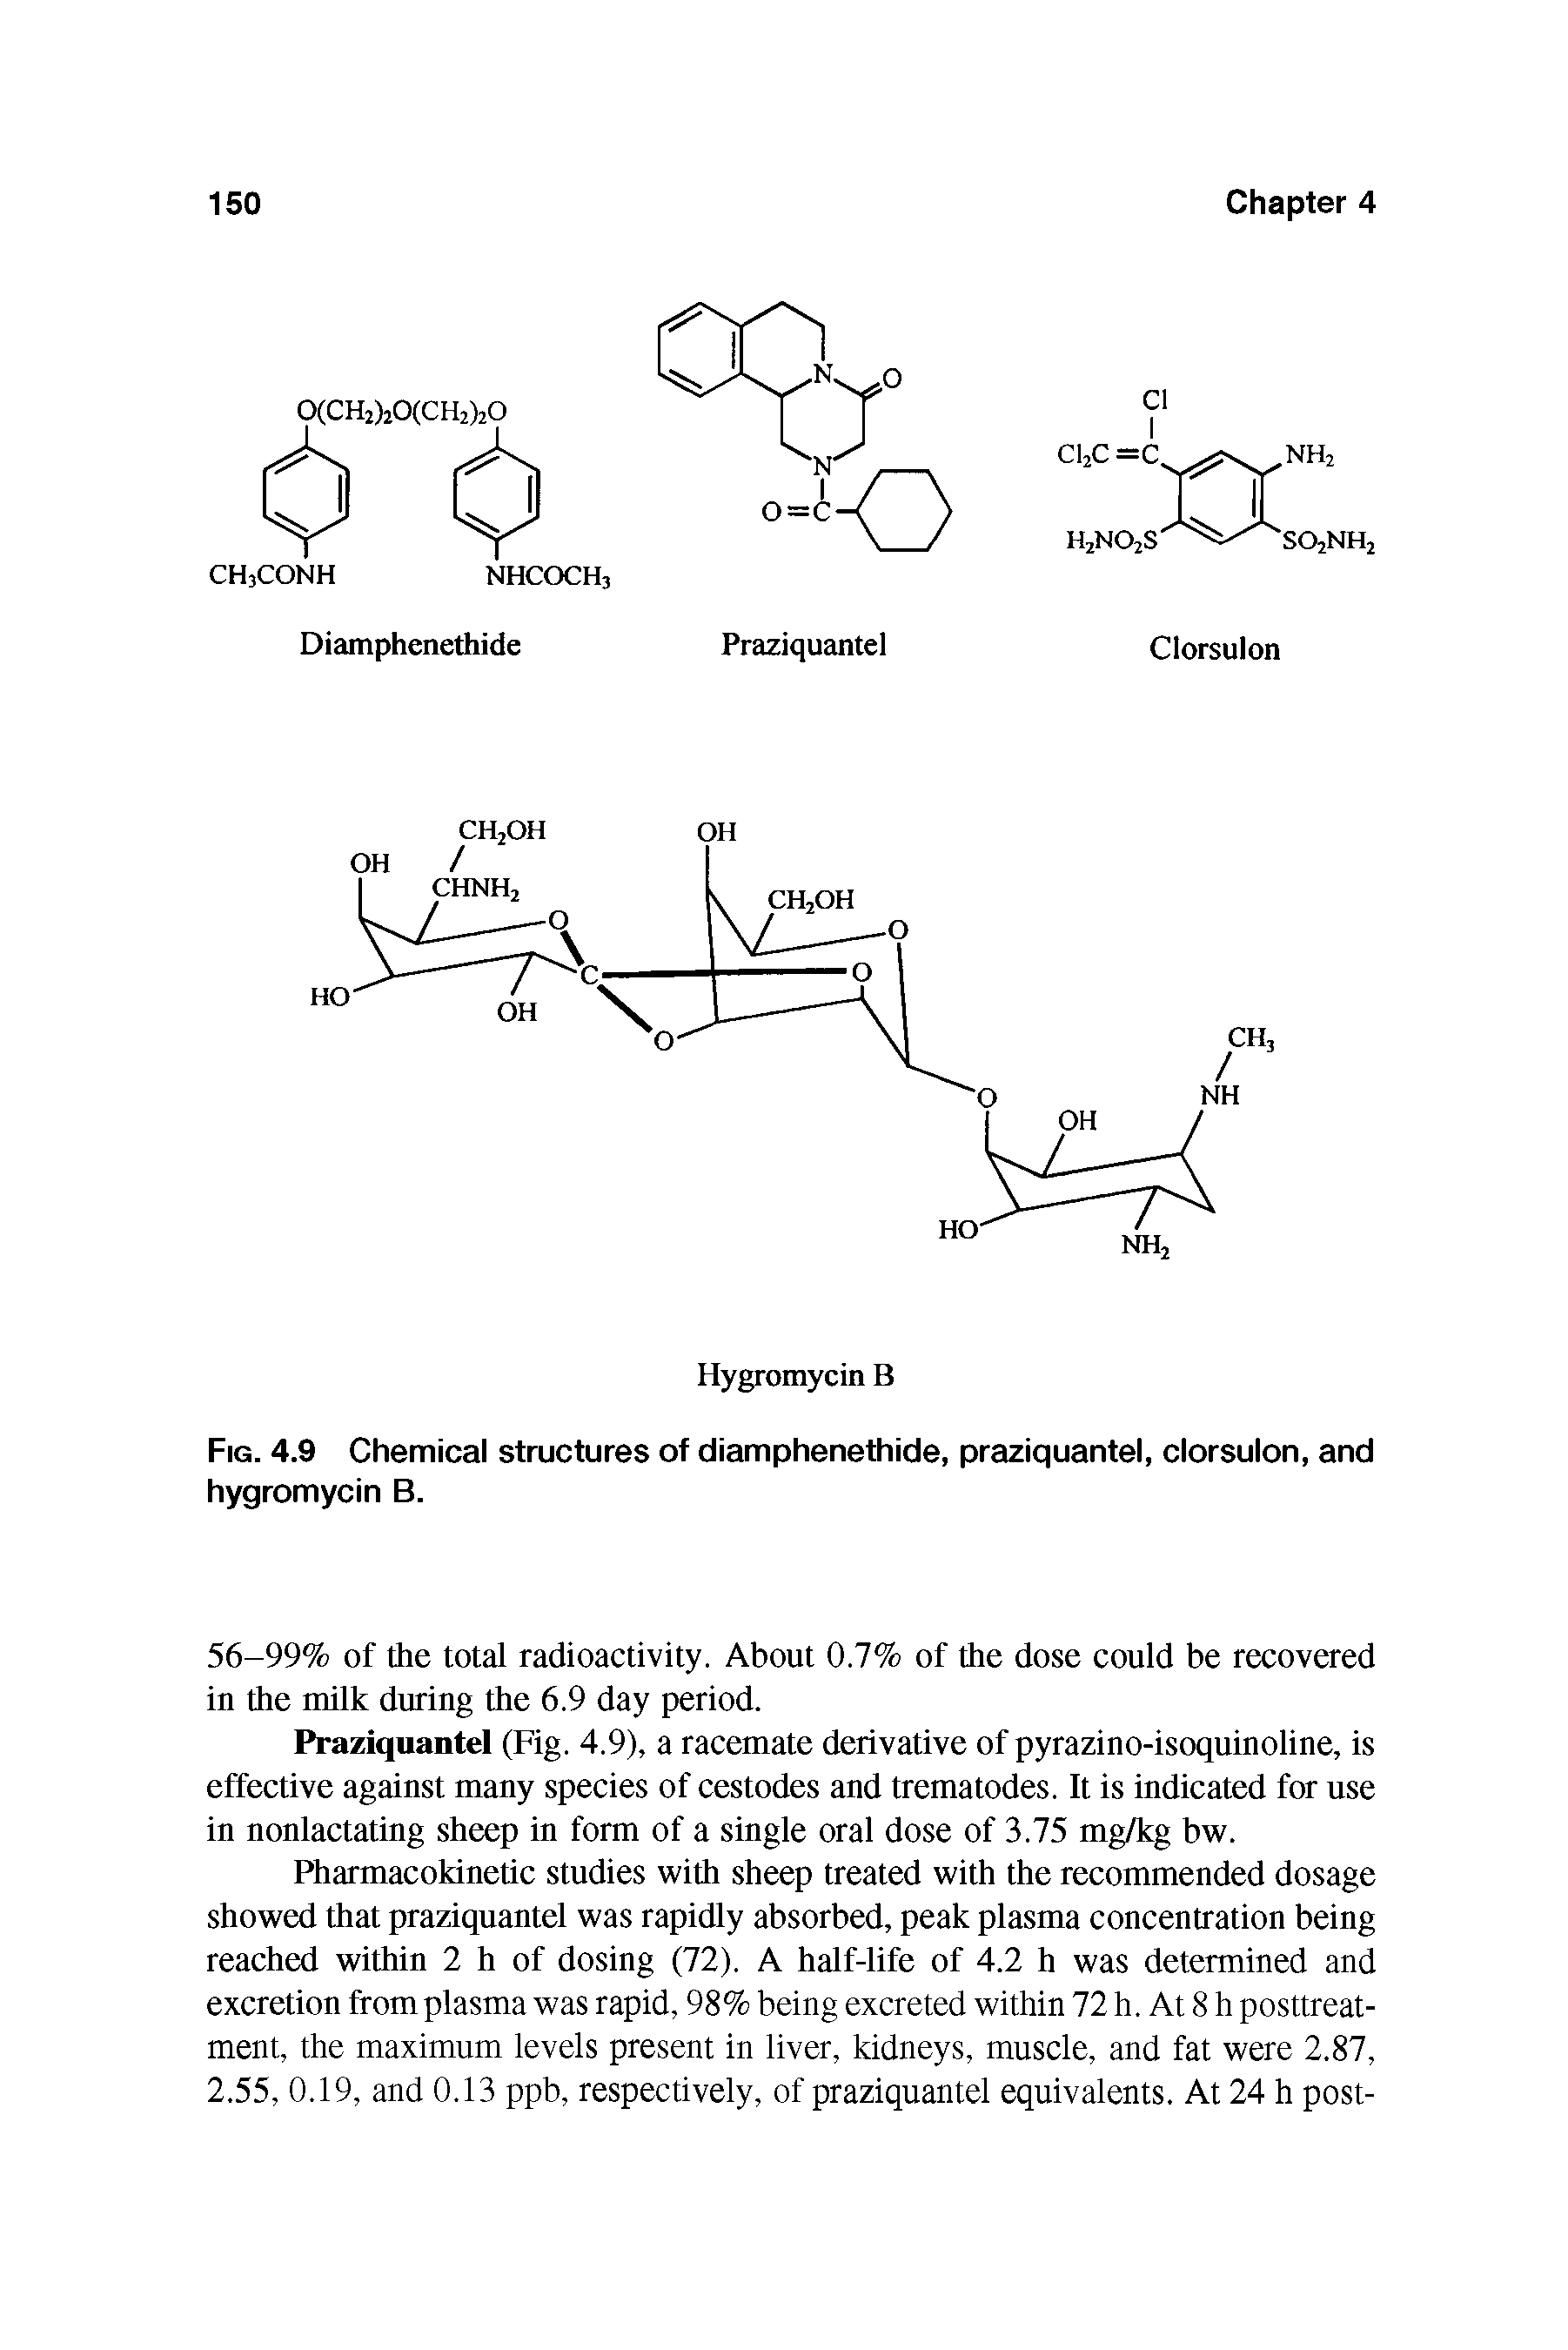 Fig. 4.9 Chemical structures of diamphenethide, praziquantel, clorsulon, and hygromycin B.